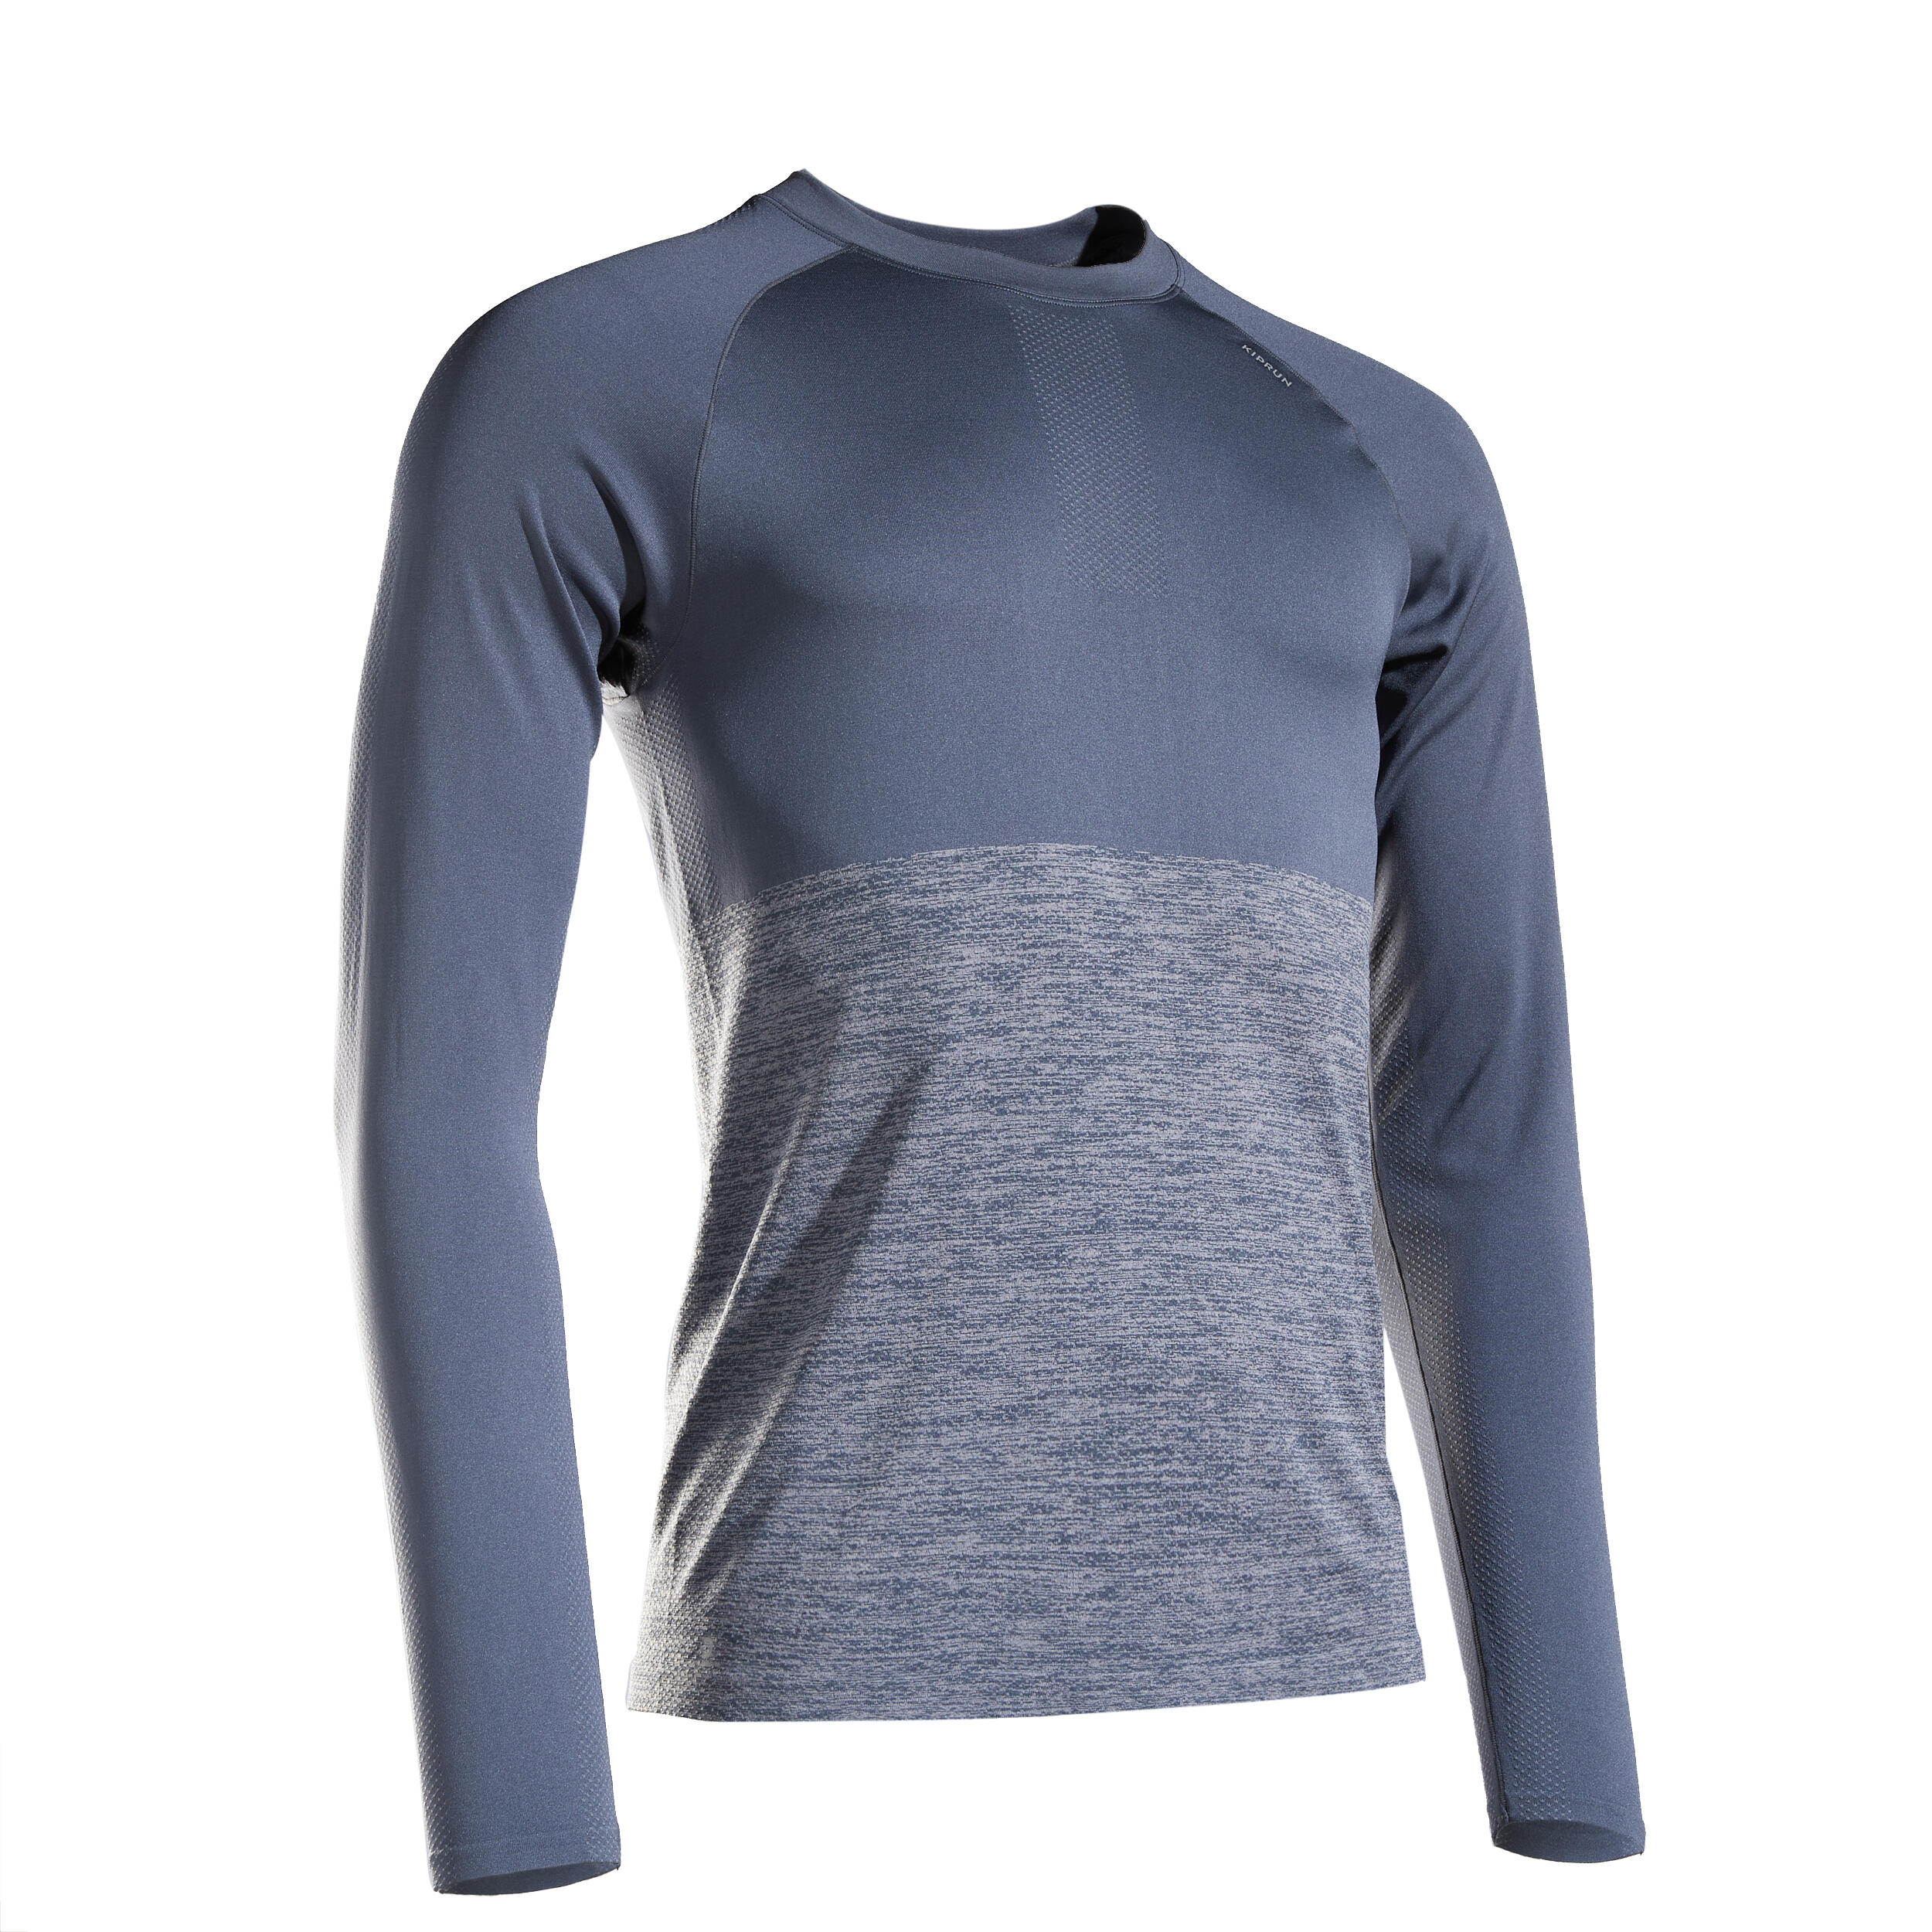 KIPRUN CARE MEN'S BREATHABLE LONG-SLEEVED RUNNING T-SHIRT - GREY LIMITED EDITION 9/9